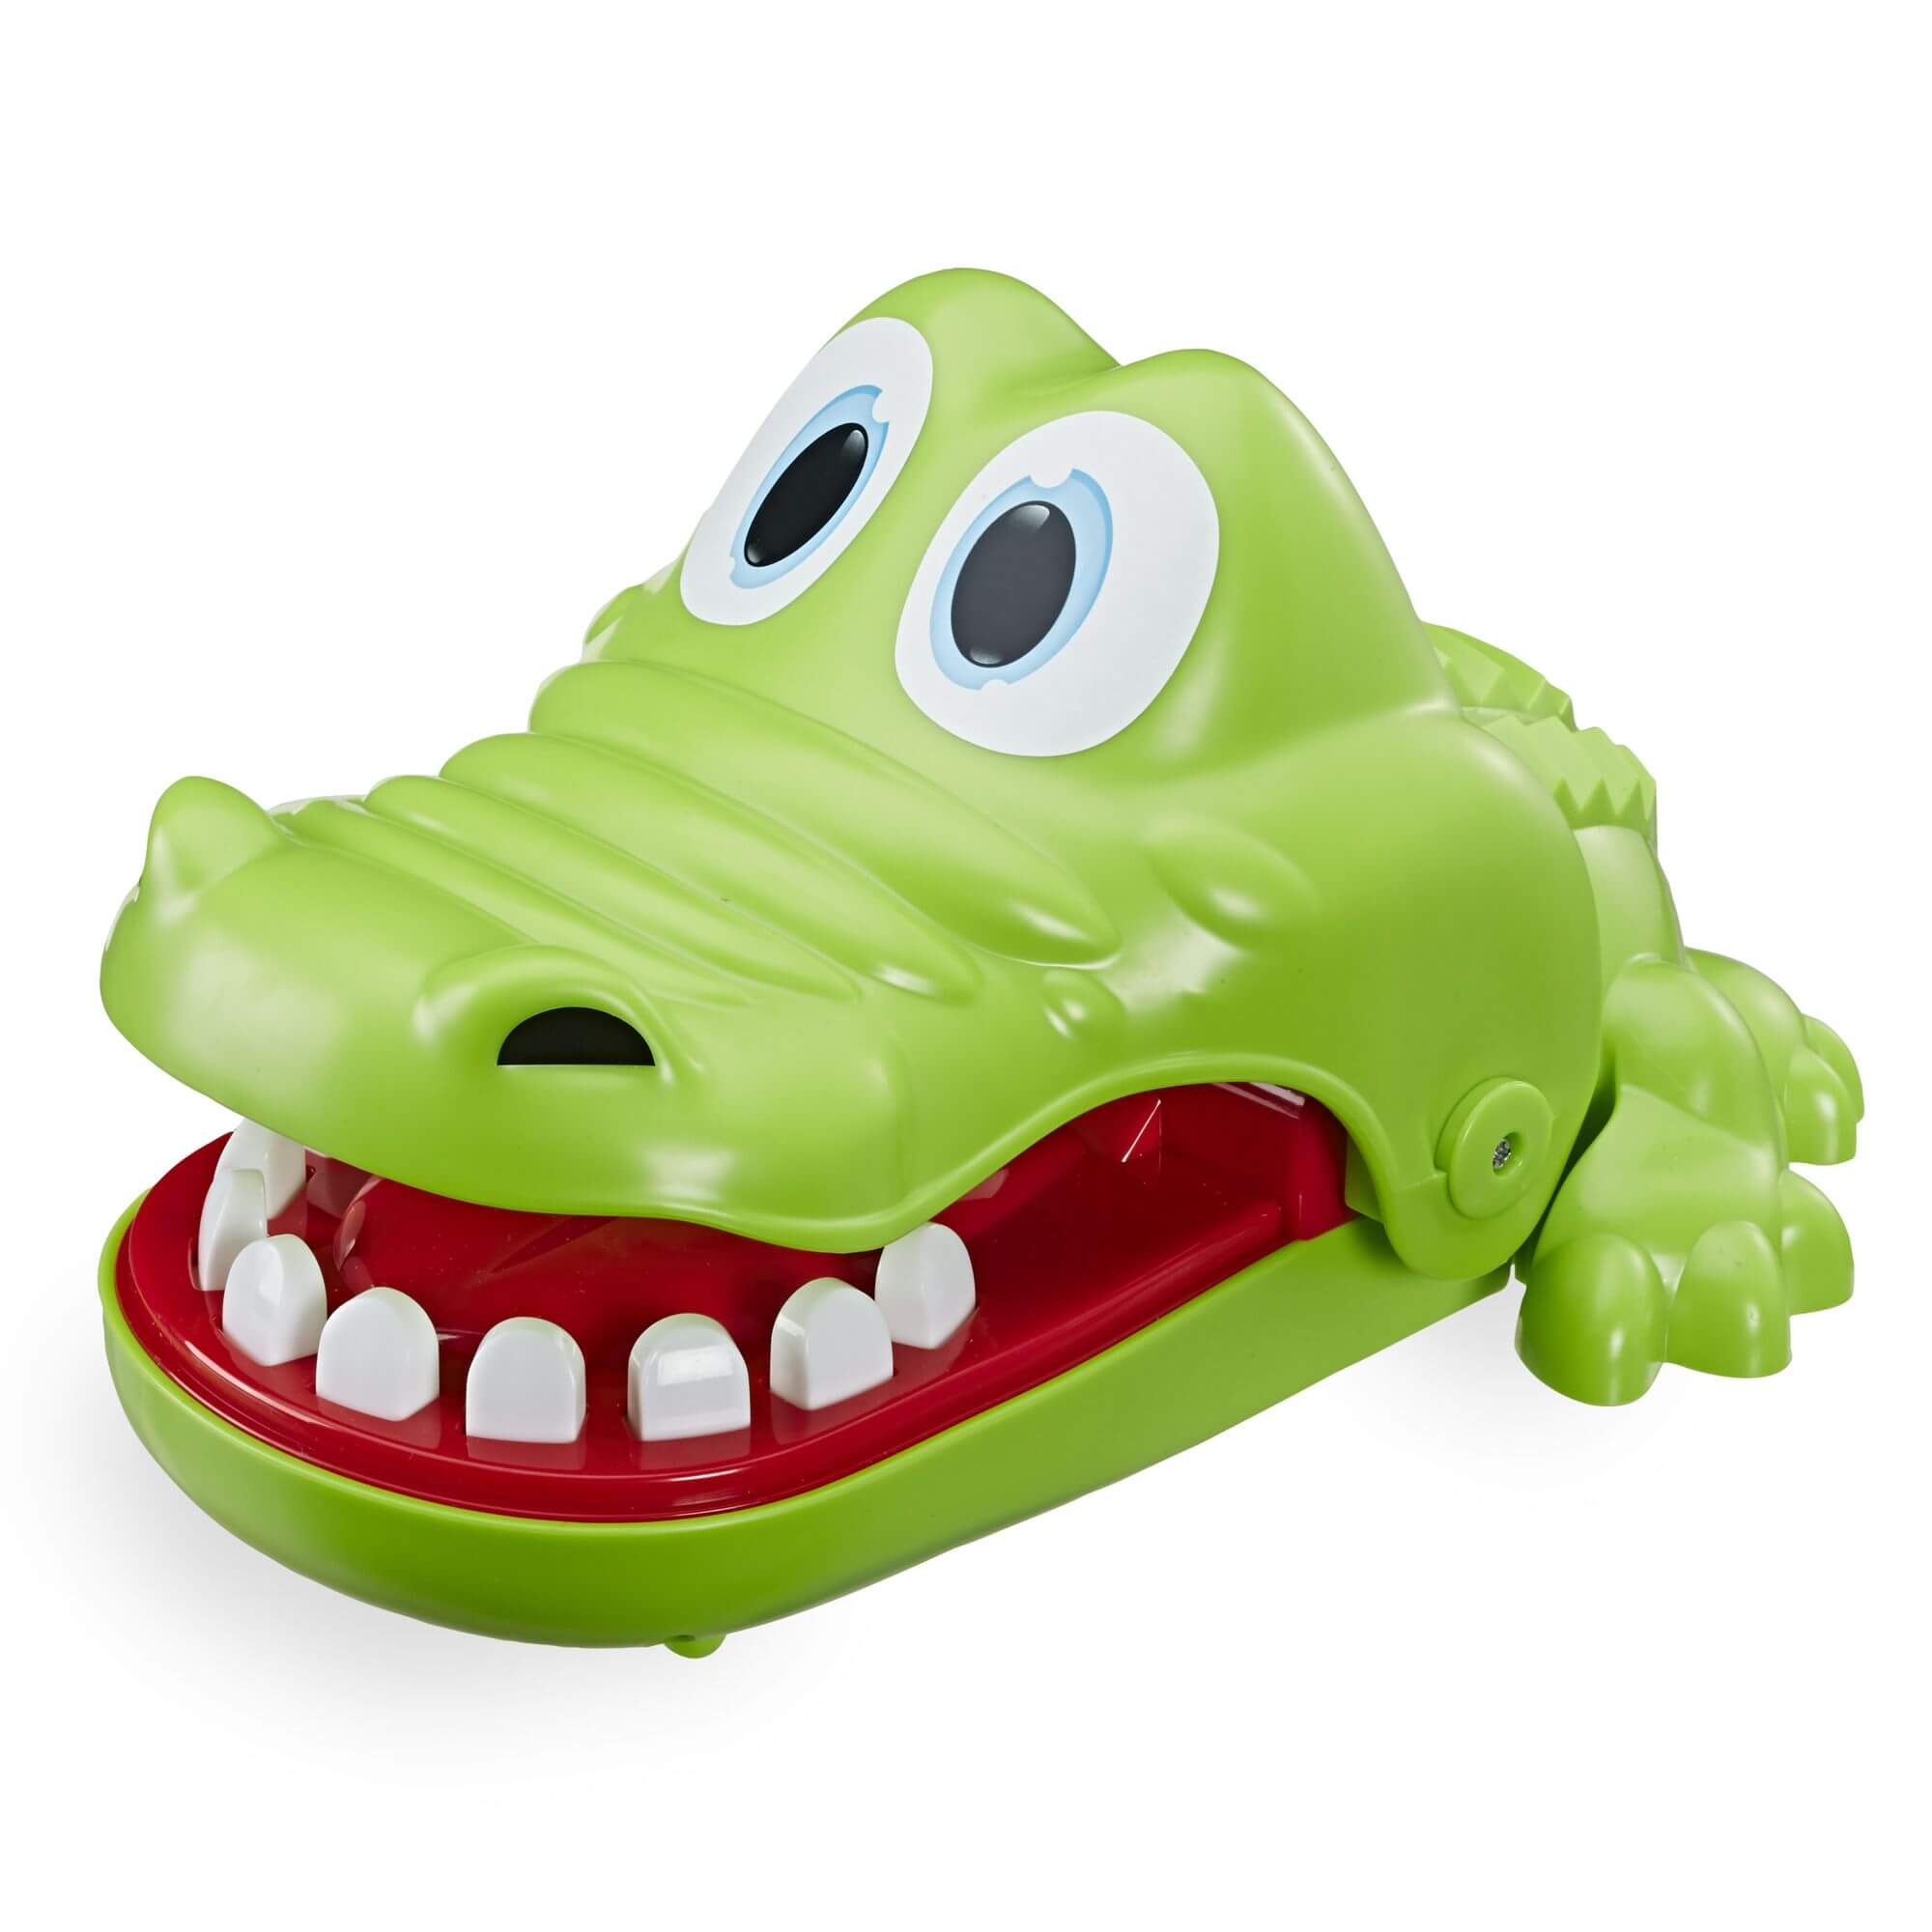 Crocodile dentist - social skills and play with friends - shop hasbro games at The Toy Room